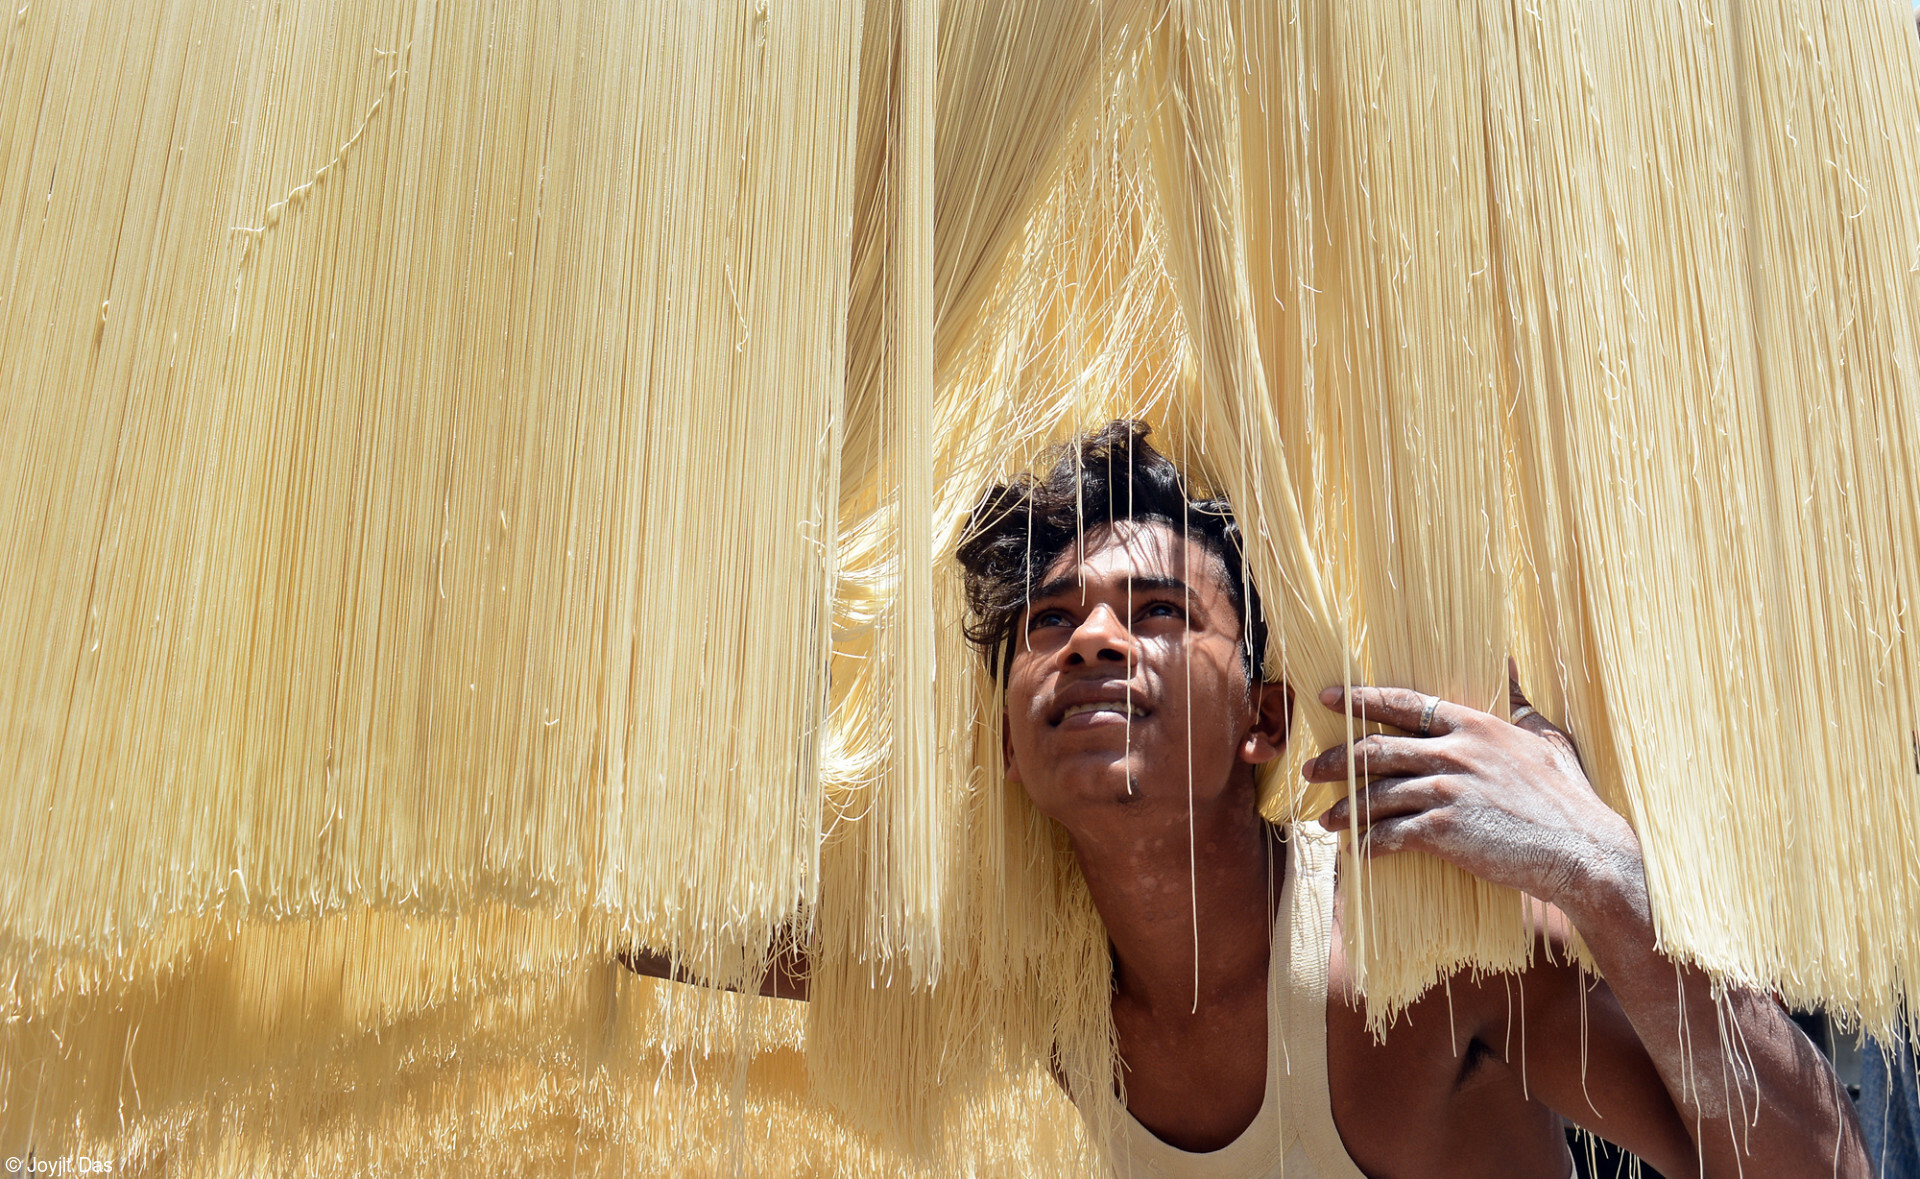 Food processing. © Joyjit Das/Pink Lady® Food Photographer of the Year 2022